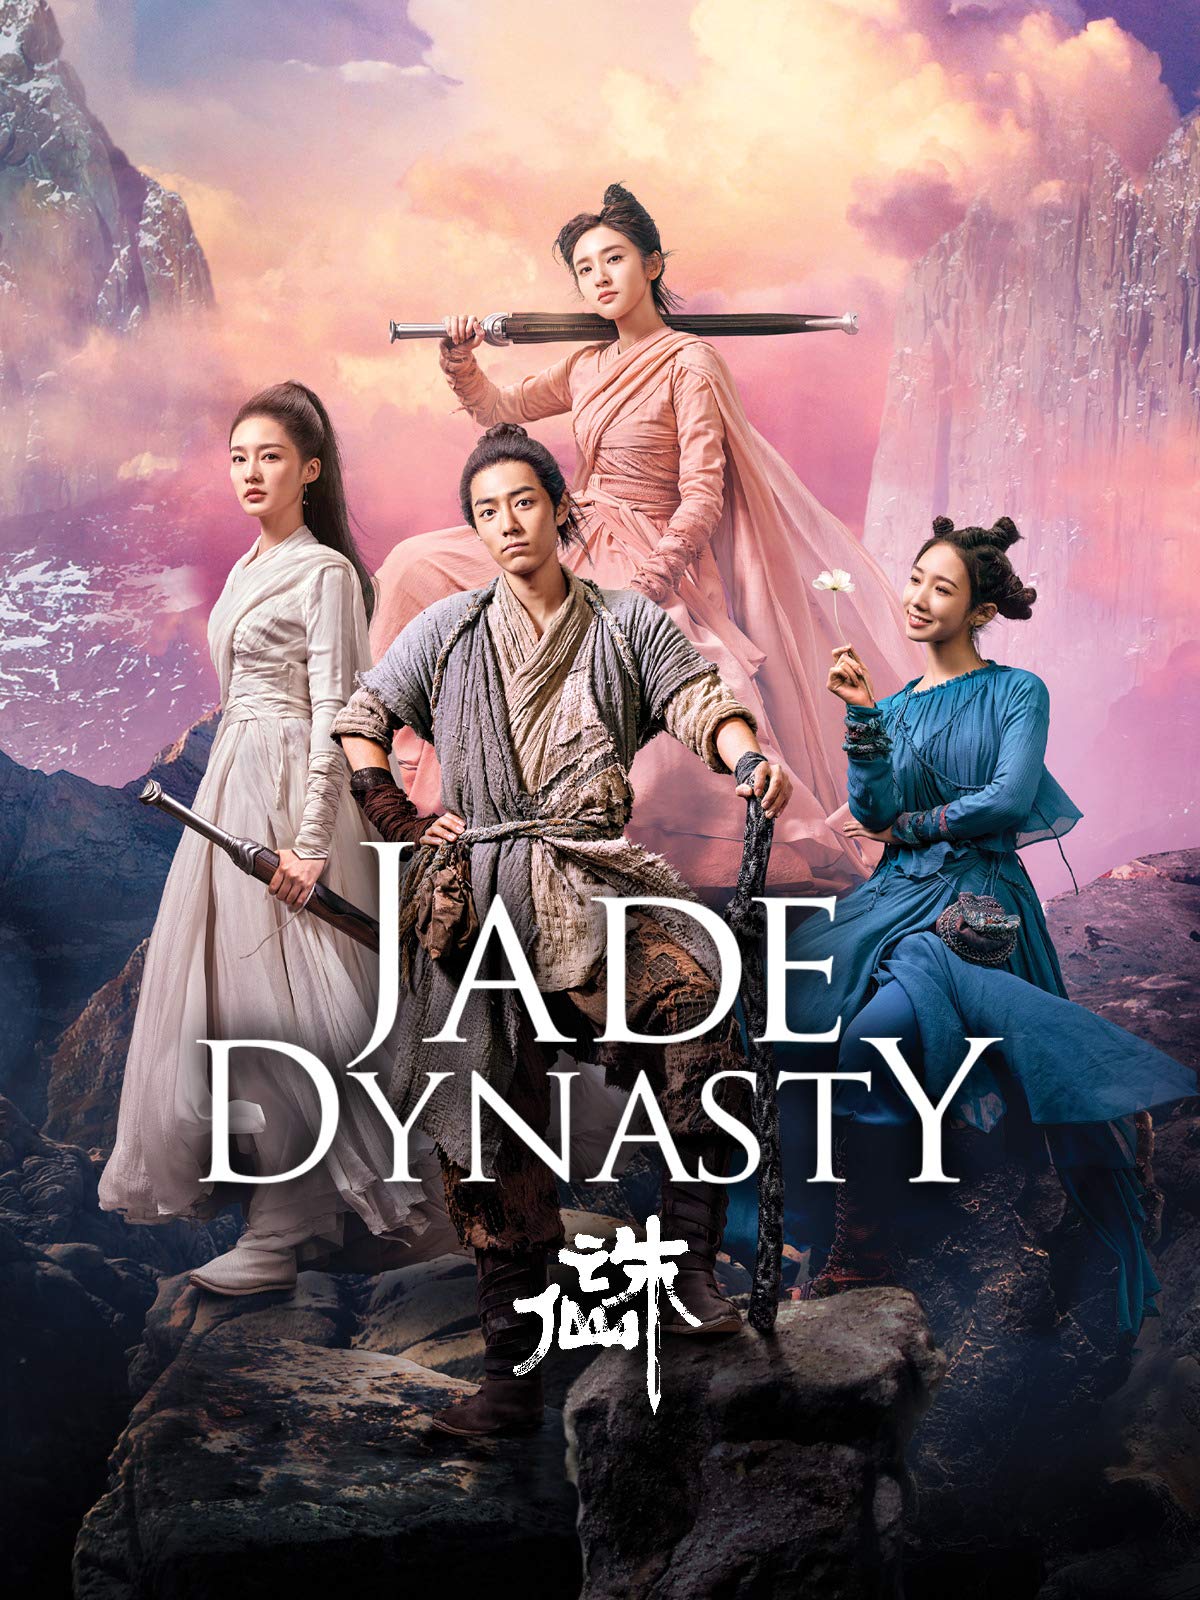 jade dynasty movie download in tamil dubbed